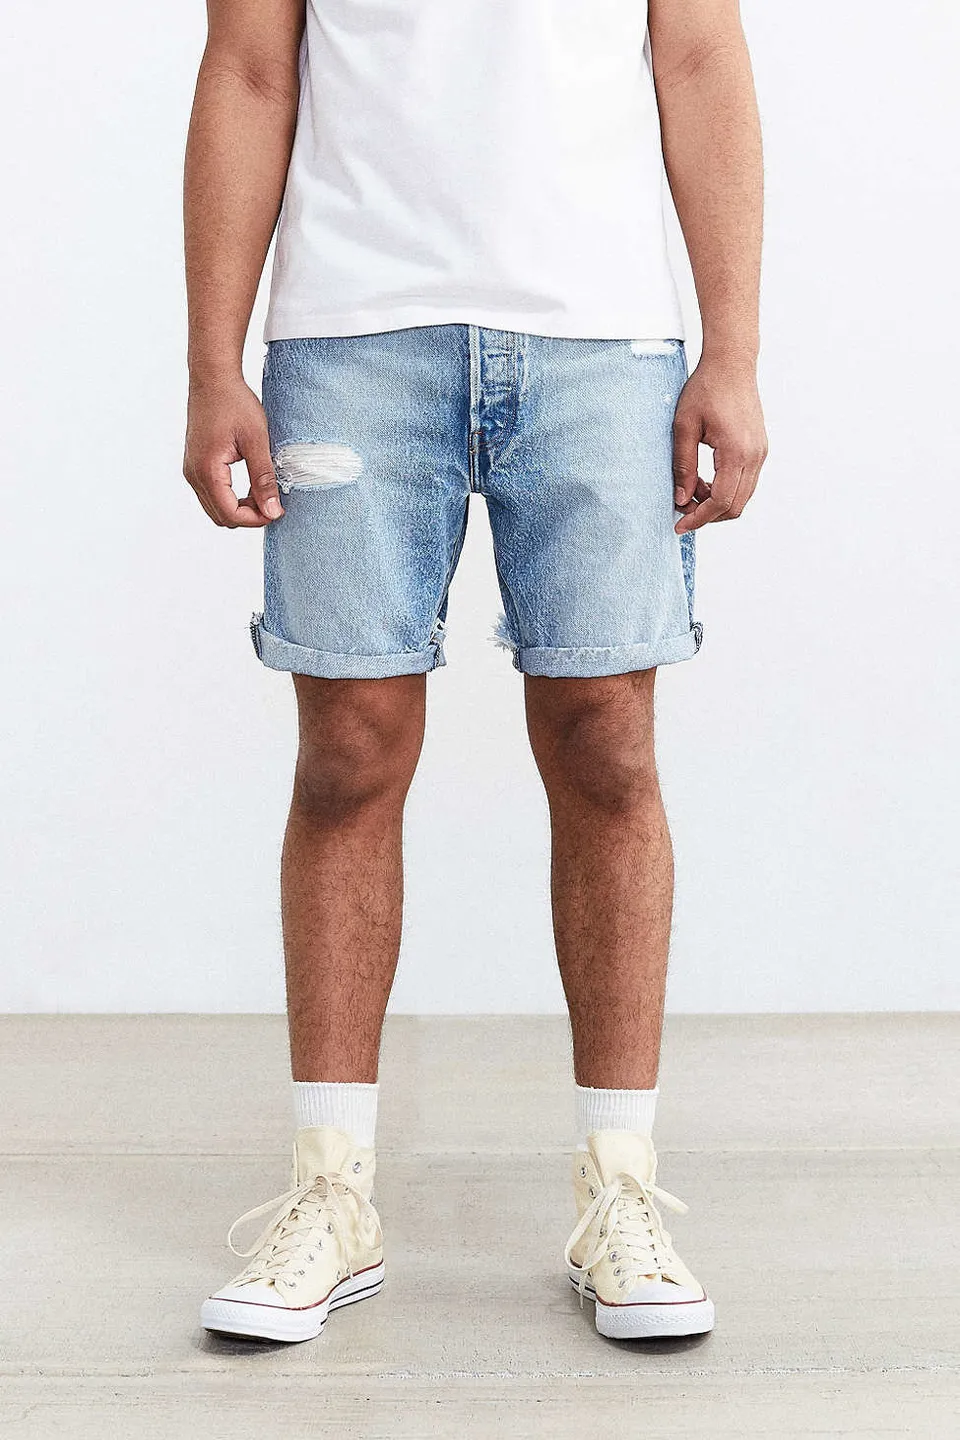 Everything Guide To Wearing Shorts And Socks For Men | HuffPost Life